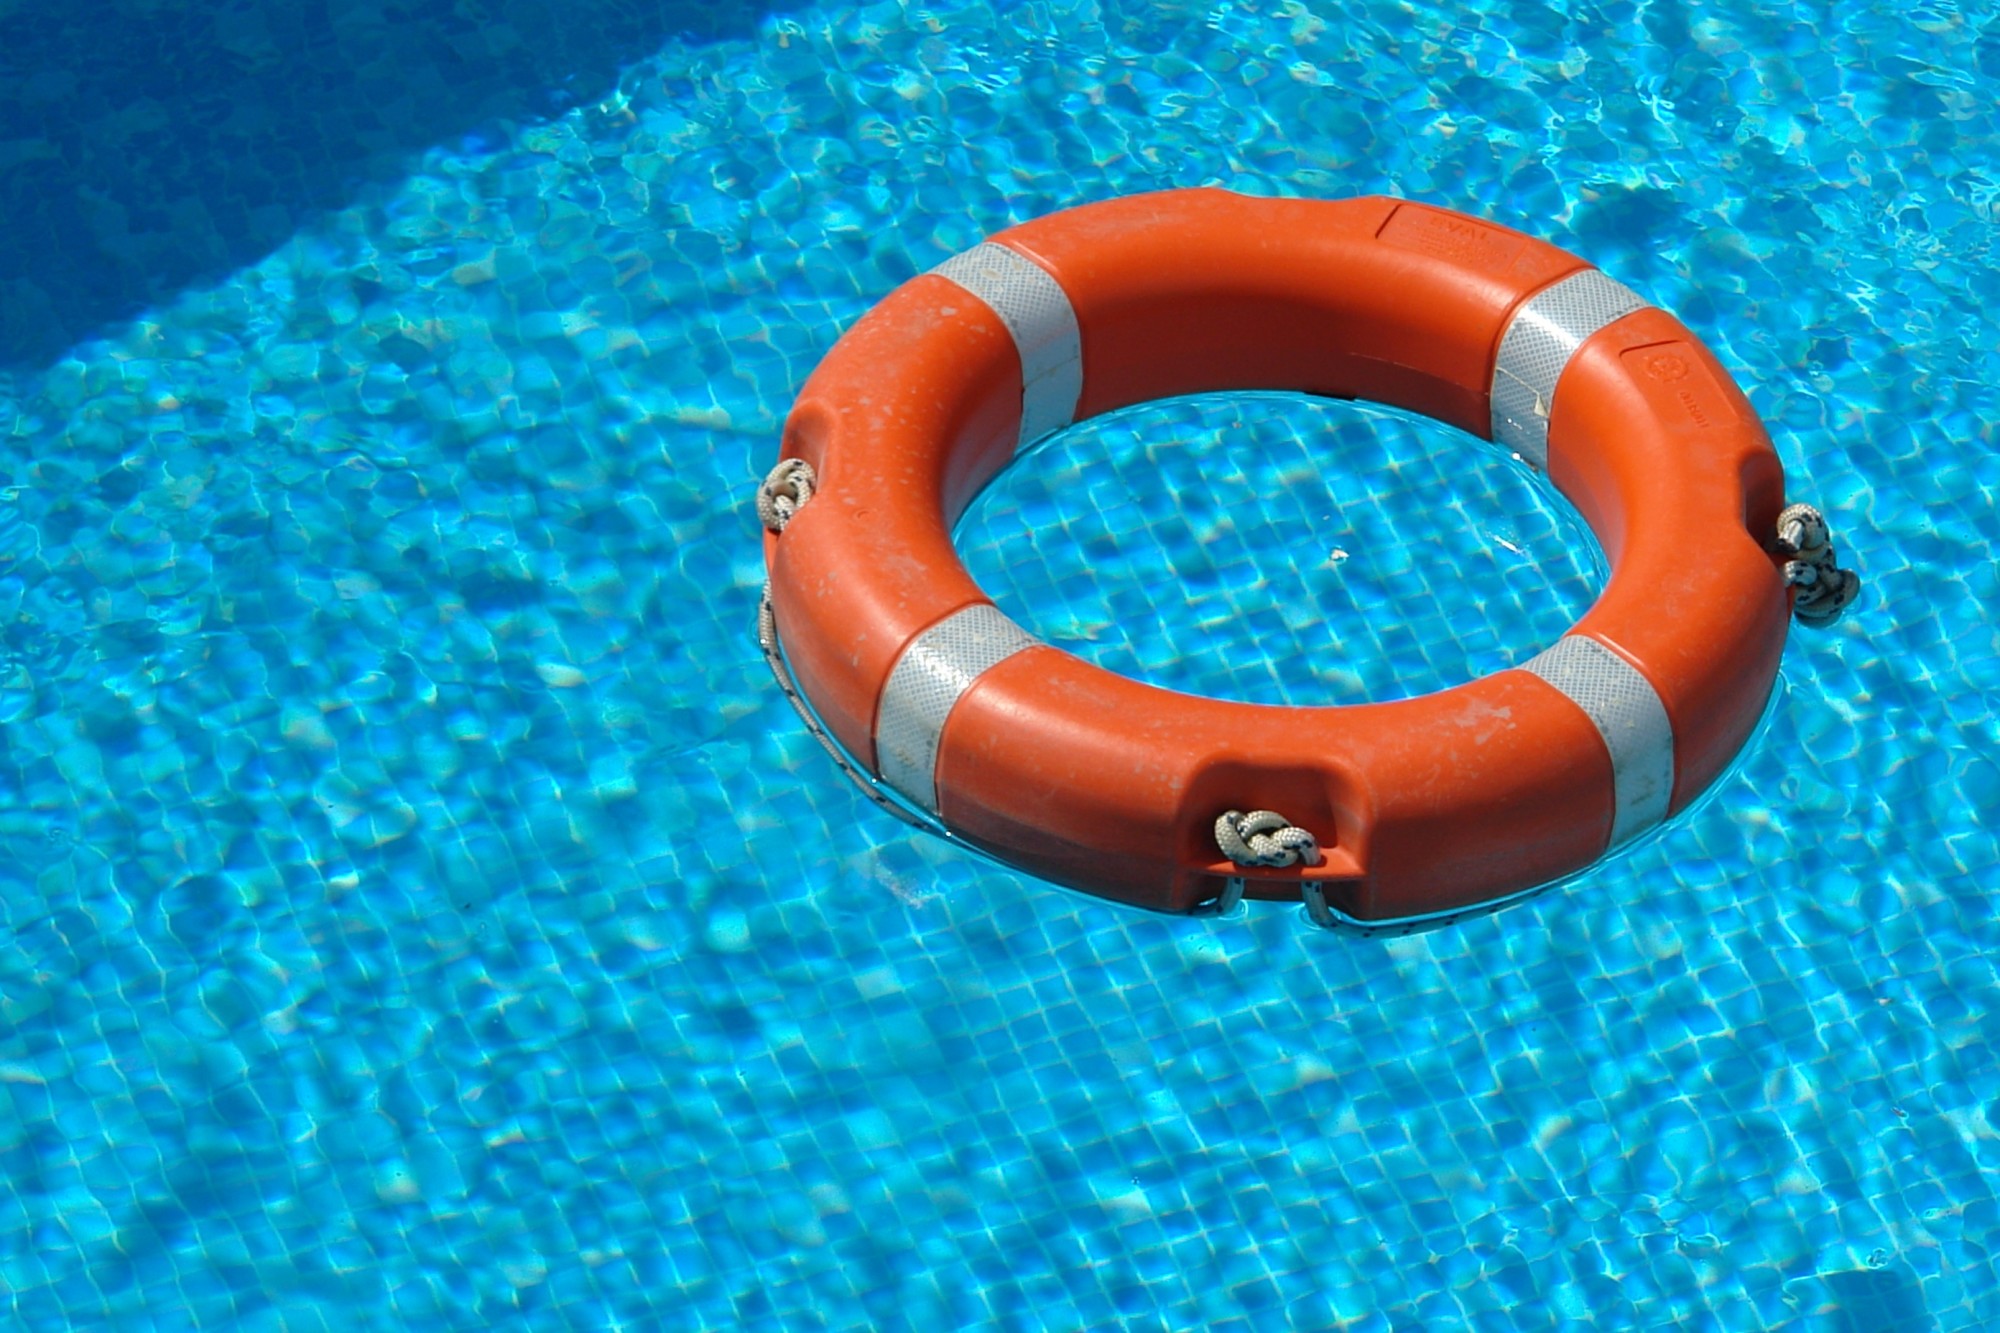 Keep reading if you're installing a swimming pool soon. We're discussing common pool safety hazards and how to avoid them, so you can keep your family safe.